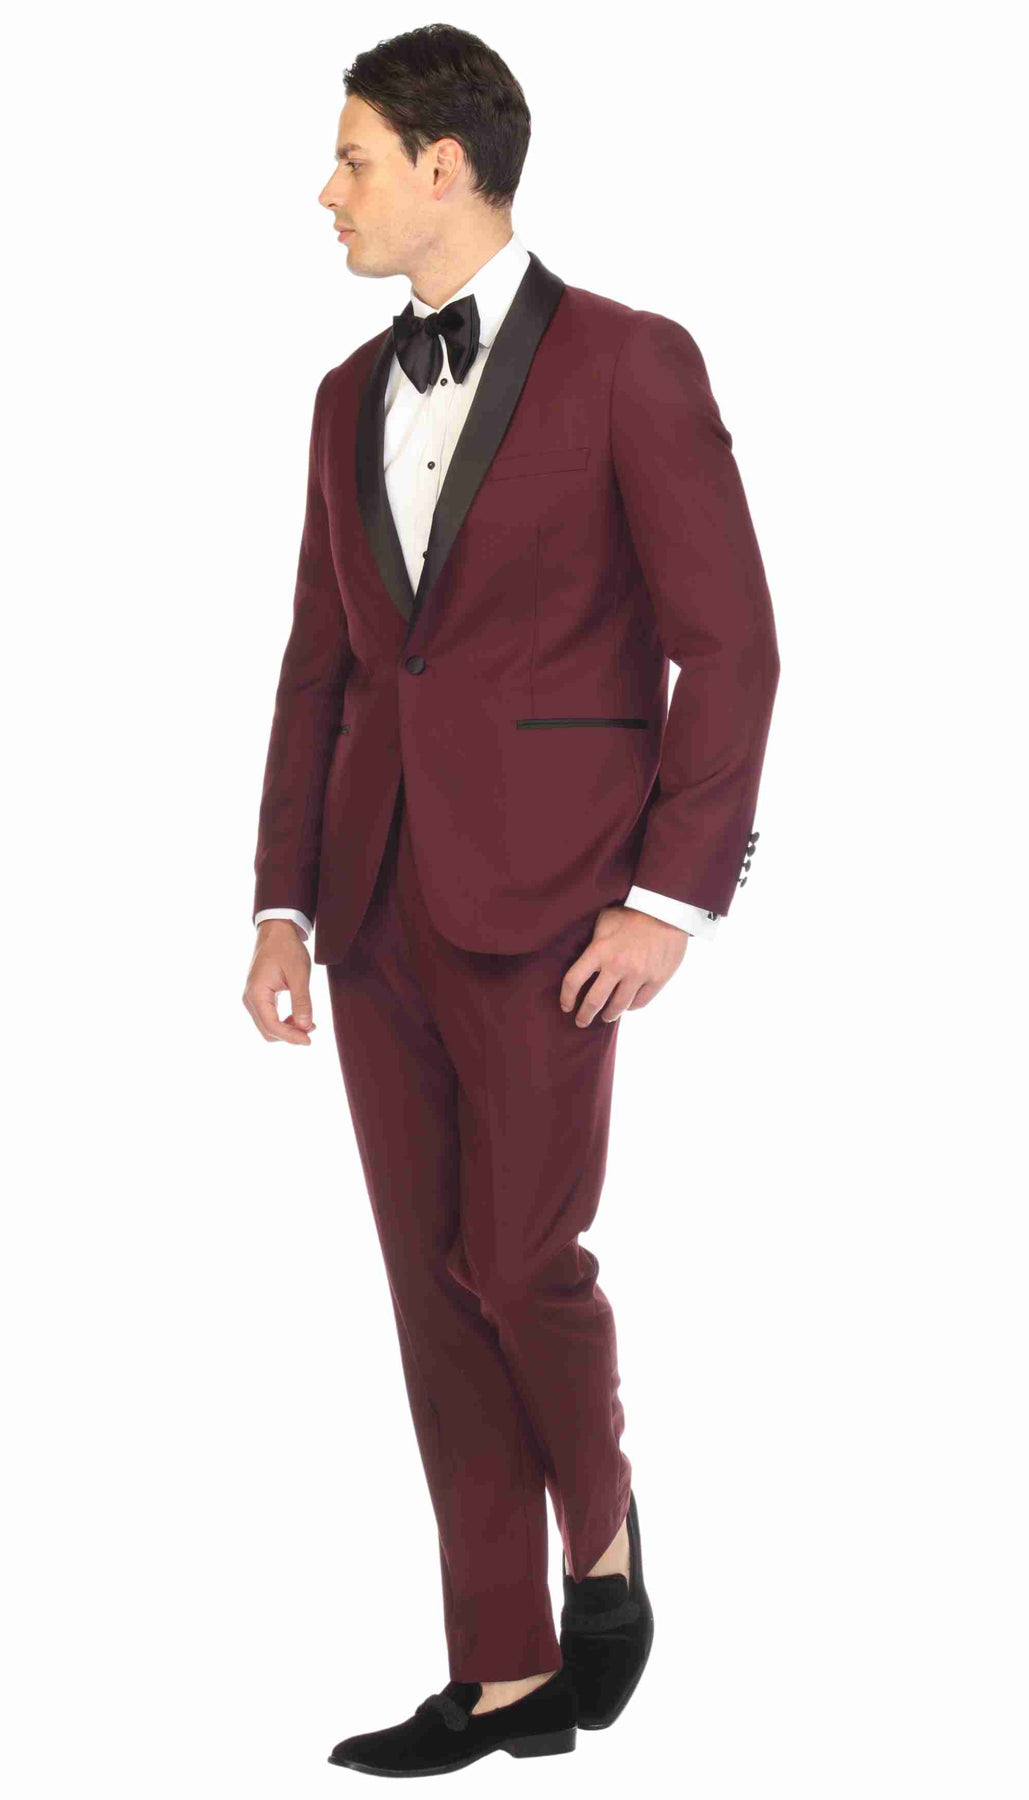 Burgundy and Black Tuxedo for Men Elegant 3 Piece Prom Suits for Young Men  School Party at Amazon Men's Clothing store